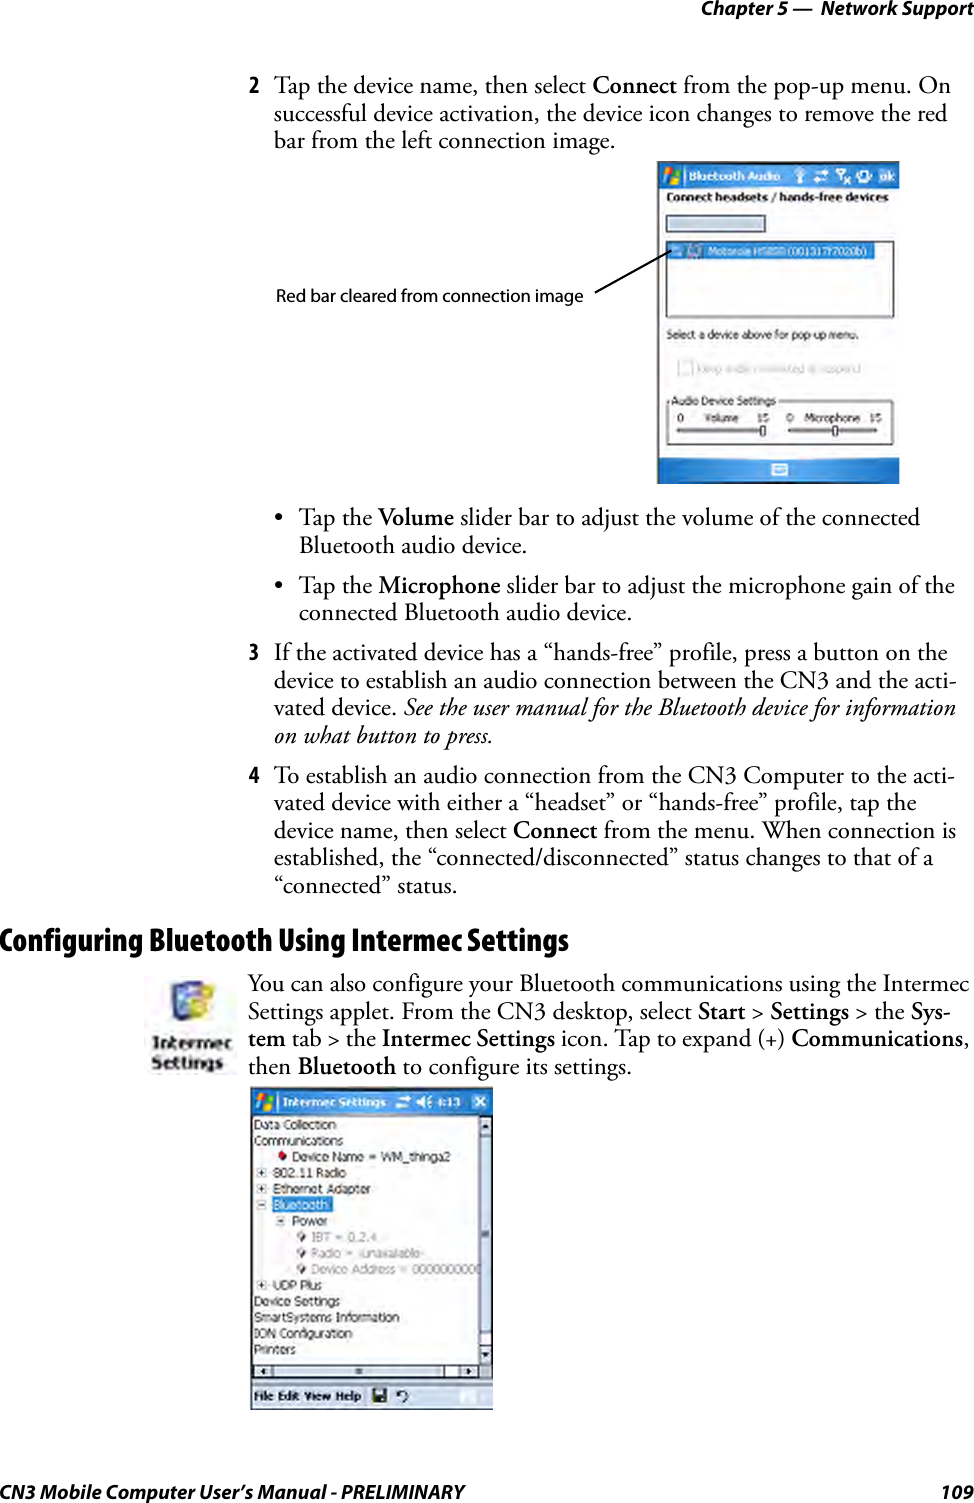 Chapter 5 —  Network SupportCN3 Mobile Computer User’s Manual - PRELIMINARY 1092Tap the device name, then select Connect from the pop-up menu. On successful device activation, the device icon changes to remove the red bar from the left connection image.•Tap the Volume slider bar to adjust the volume of the connected Bluetooth audio device.•Tap the Microphone slider bar to adjust the microphone gain of the connected Bluetooth audio device.3If the activated device has a “hands-free” profile, press a button on the device to establish an audio connection between the CN3 and the acti-vated device. See the user manual for the Bluetooth device for information on what button to press.4To establish an audio connection from the CN3 Computer to the acti-vated device with either a “headset” or “hands-free” profile, tap the device name, then select Connect from the menu. When connection is established, the “connected/disconnected” status changes to that of a “connected” status.Configuring Bluetooth Using Intermec SettingsYou can also configure your Bluetooth communications using the Intermec Settings applet. From the CN3 desktop, select Start &gt; Settings &gt; the Sys-tem tab &gt; the Intermec Settings icon. Tap to expand (+) Communications, then Bluetooth to configure its settings.Red bar cleared from connection image